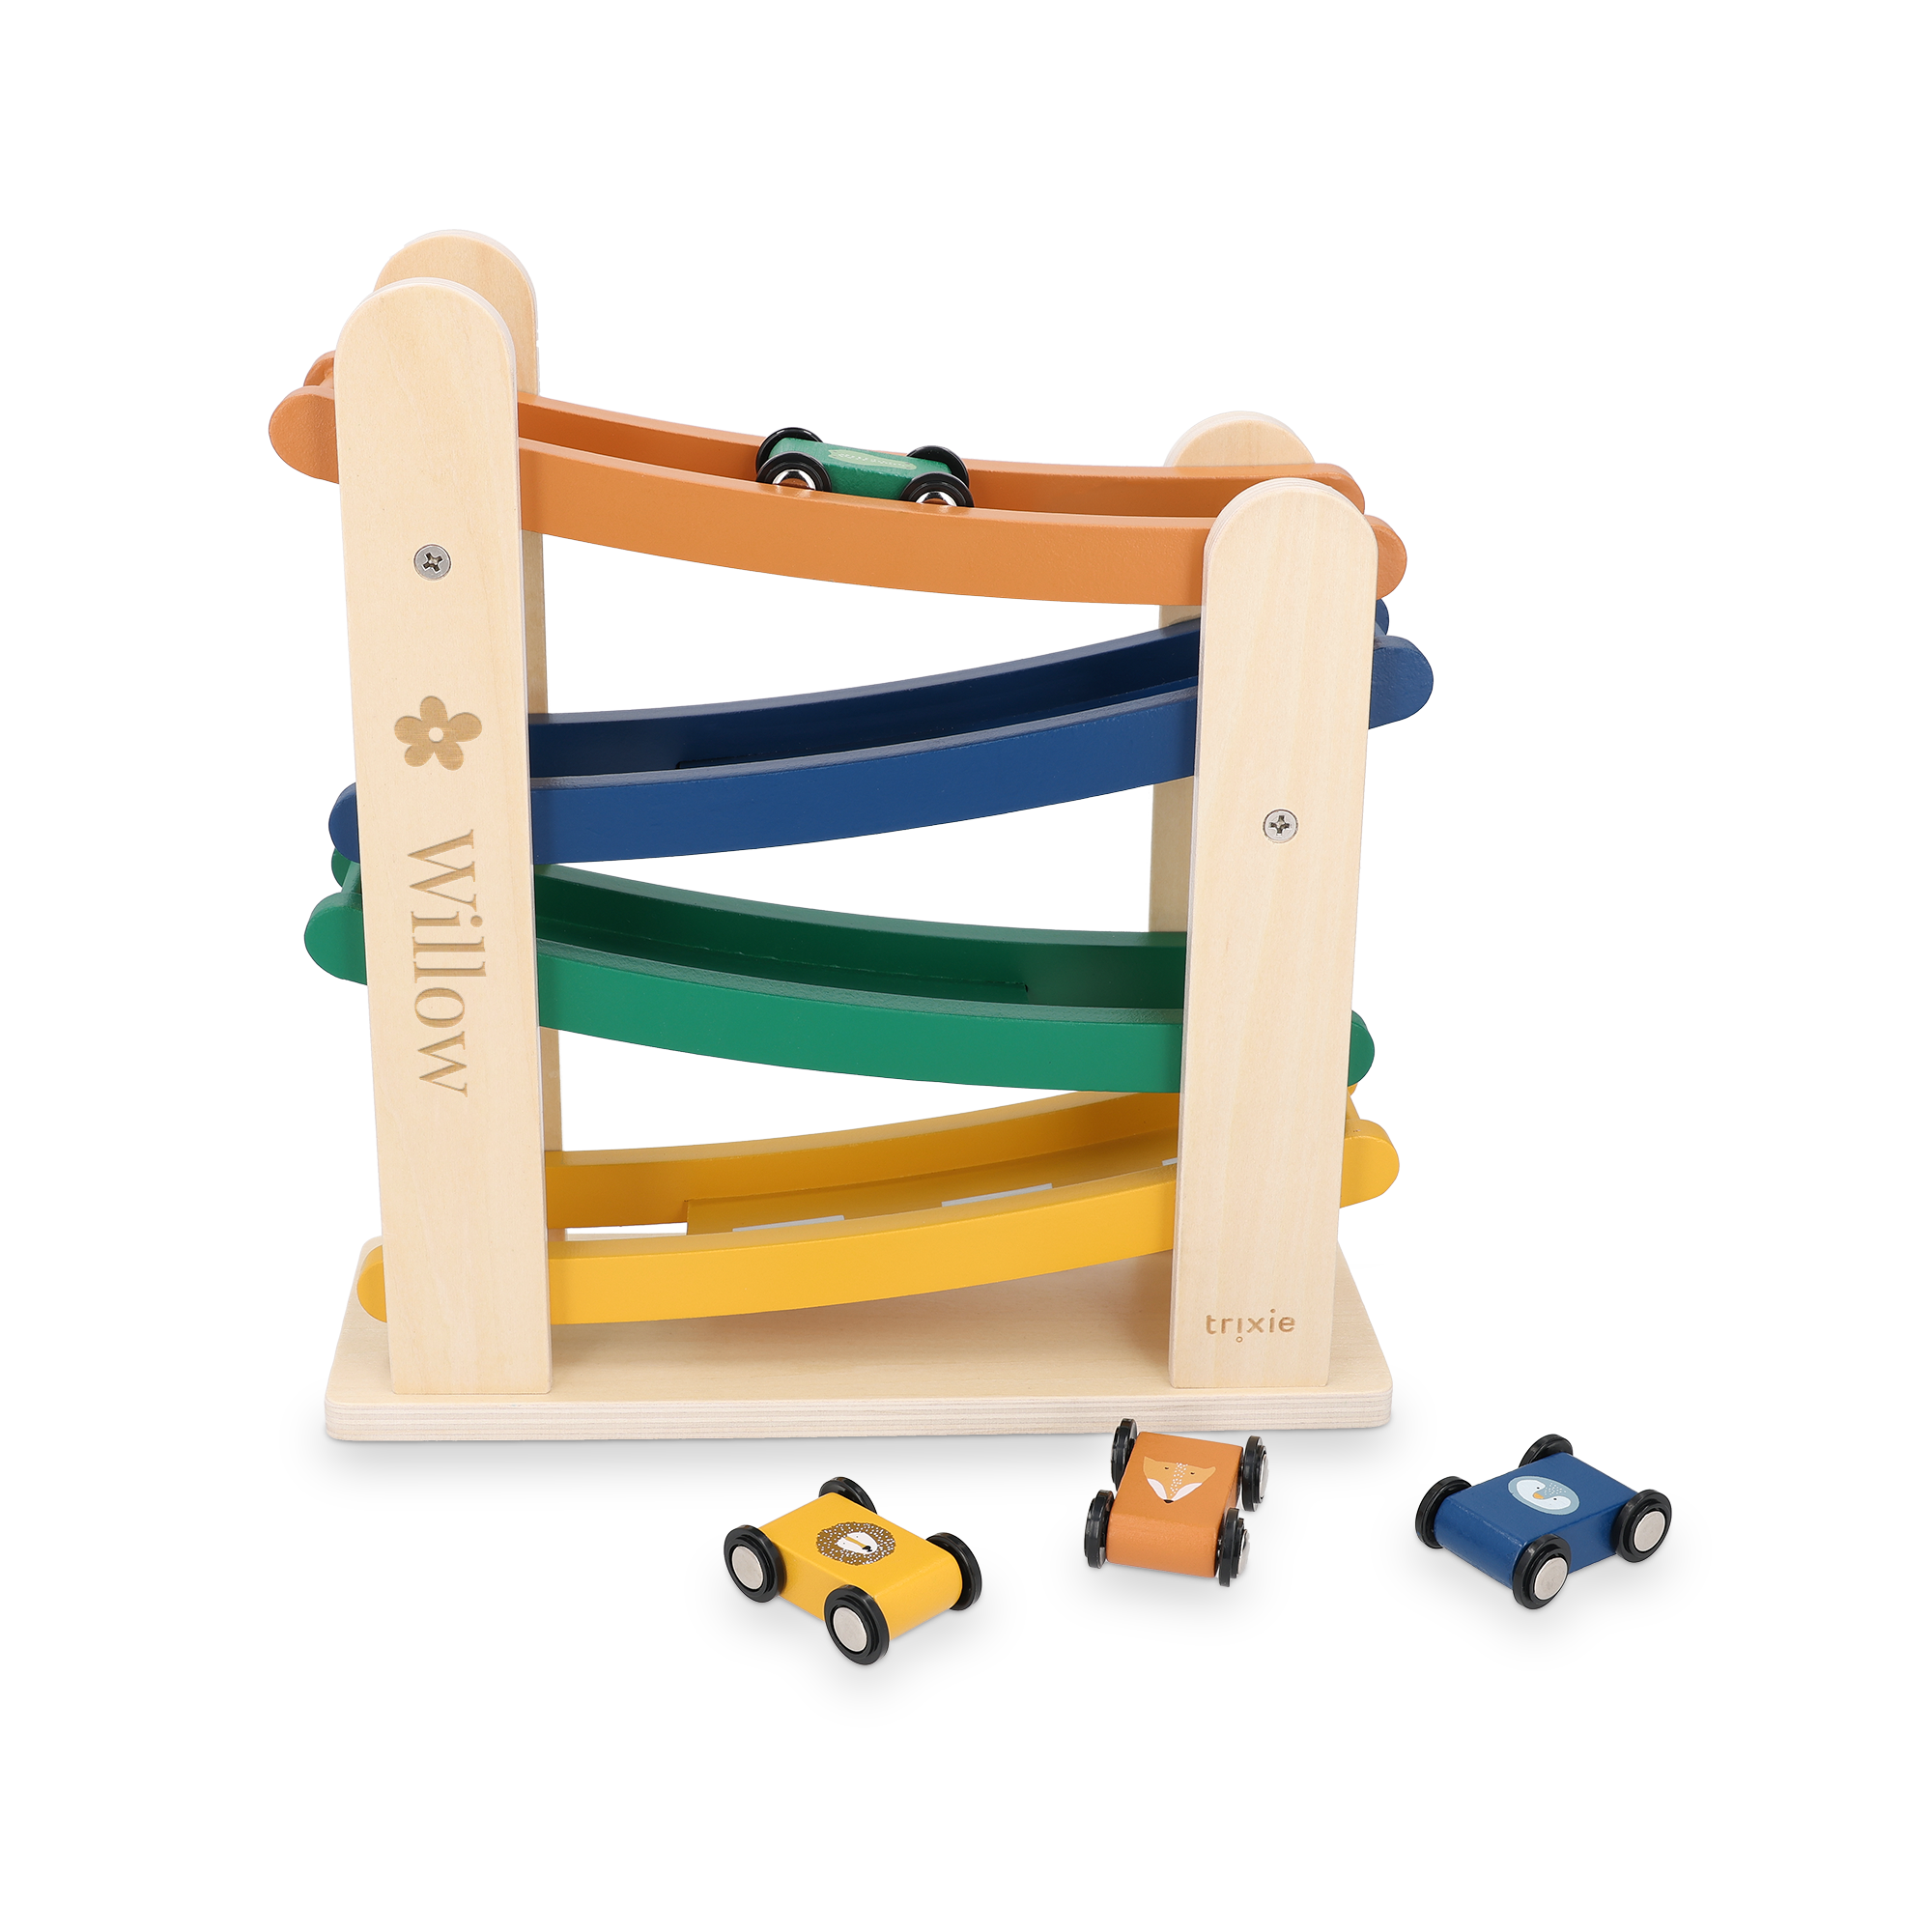 Wooden ramp racer toy - Trixie